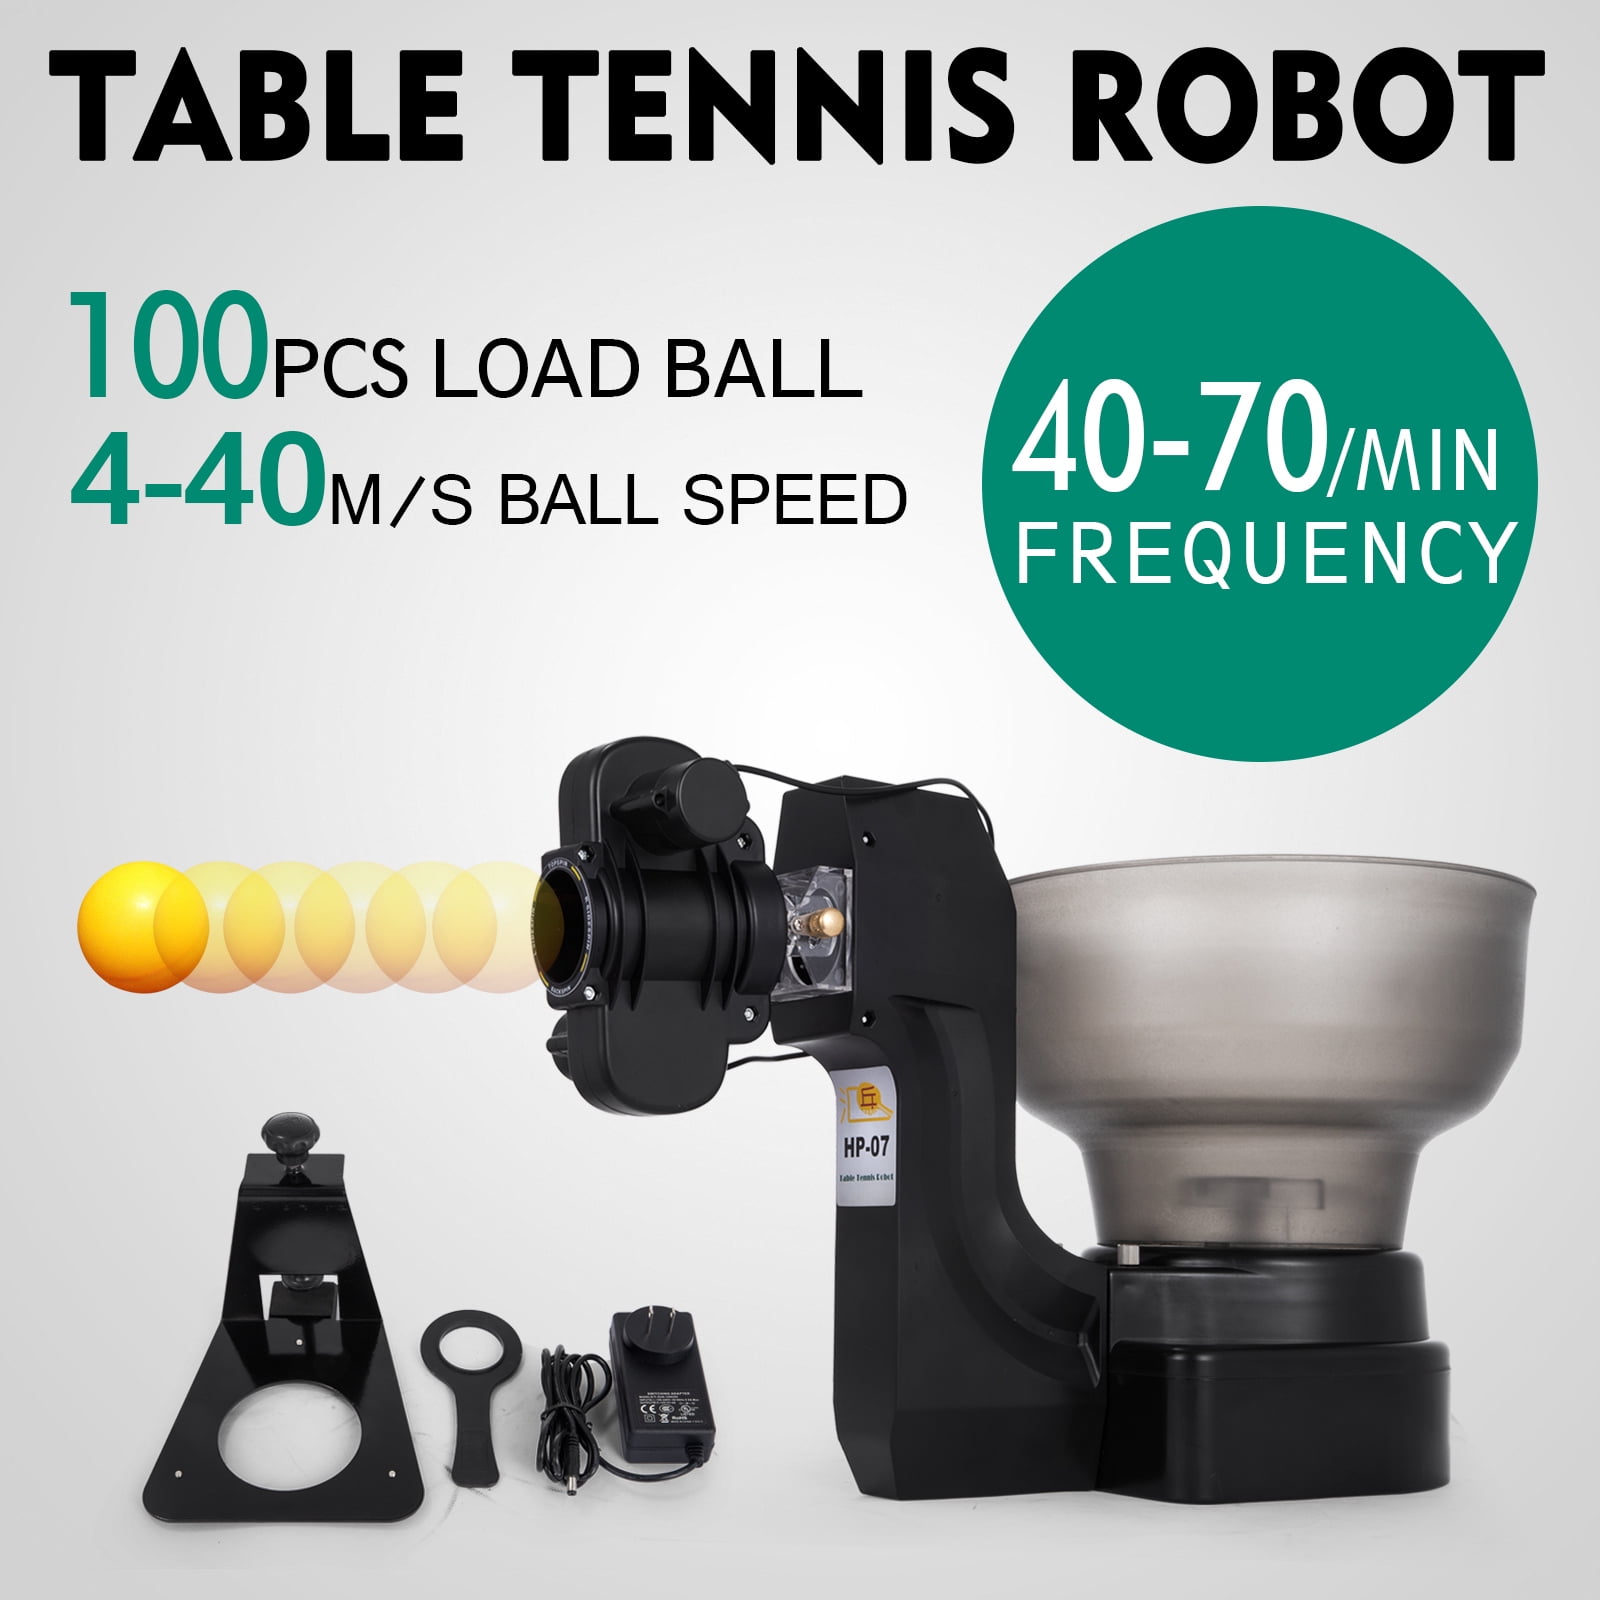 HP-07 Ping Pong Robots Table Tennis Automatic Ball Machine Professional Training 